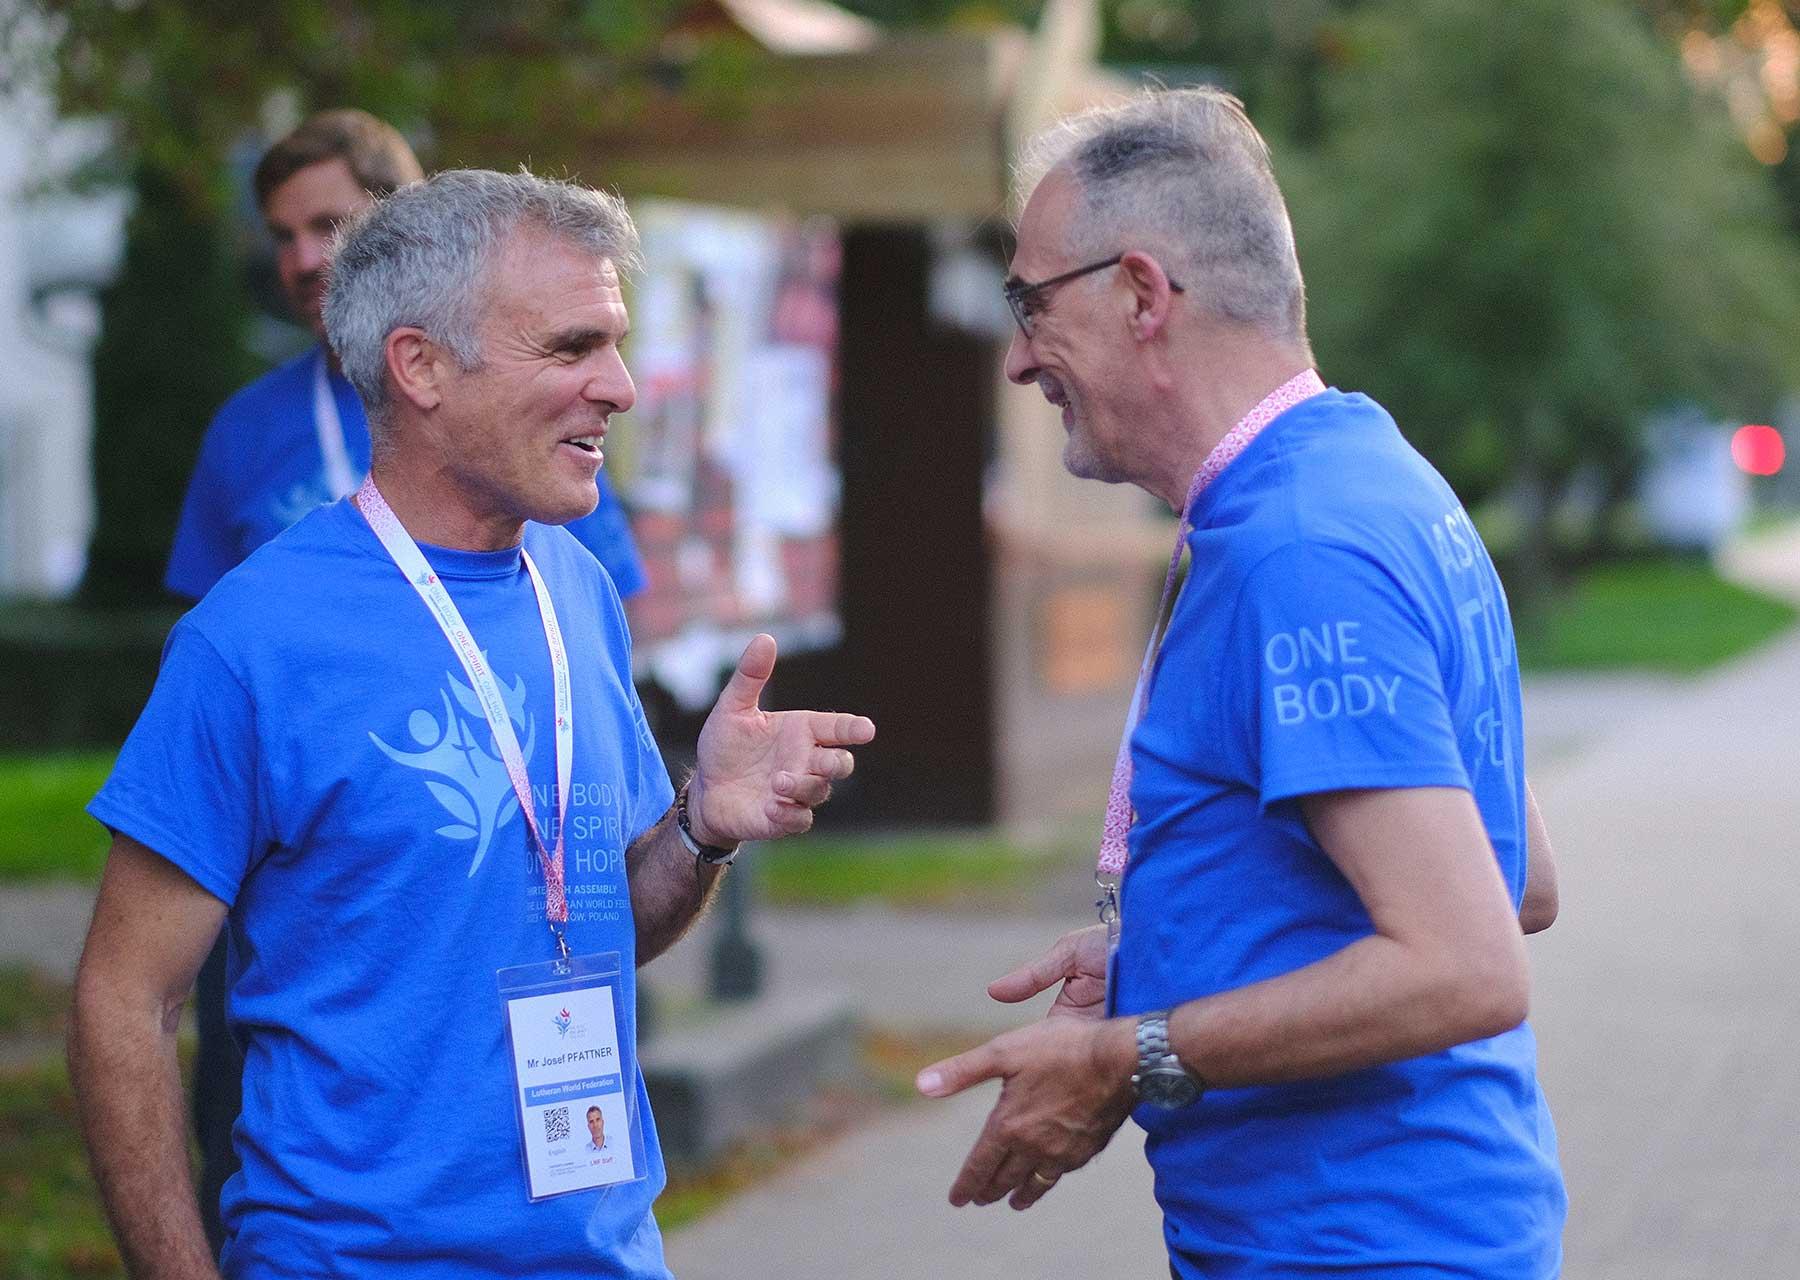 Josef Pfattner (left) and Paolo Ferraris (right), LWF Team Leader in Poland, during the LWF Assembly in Krakow. Photo: LWF/M. Renaux